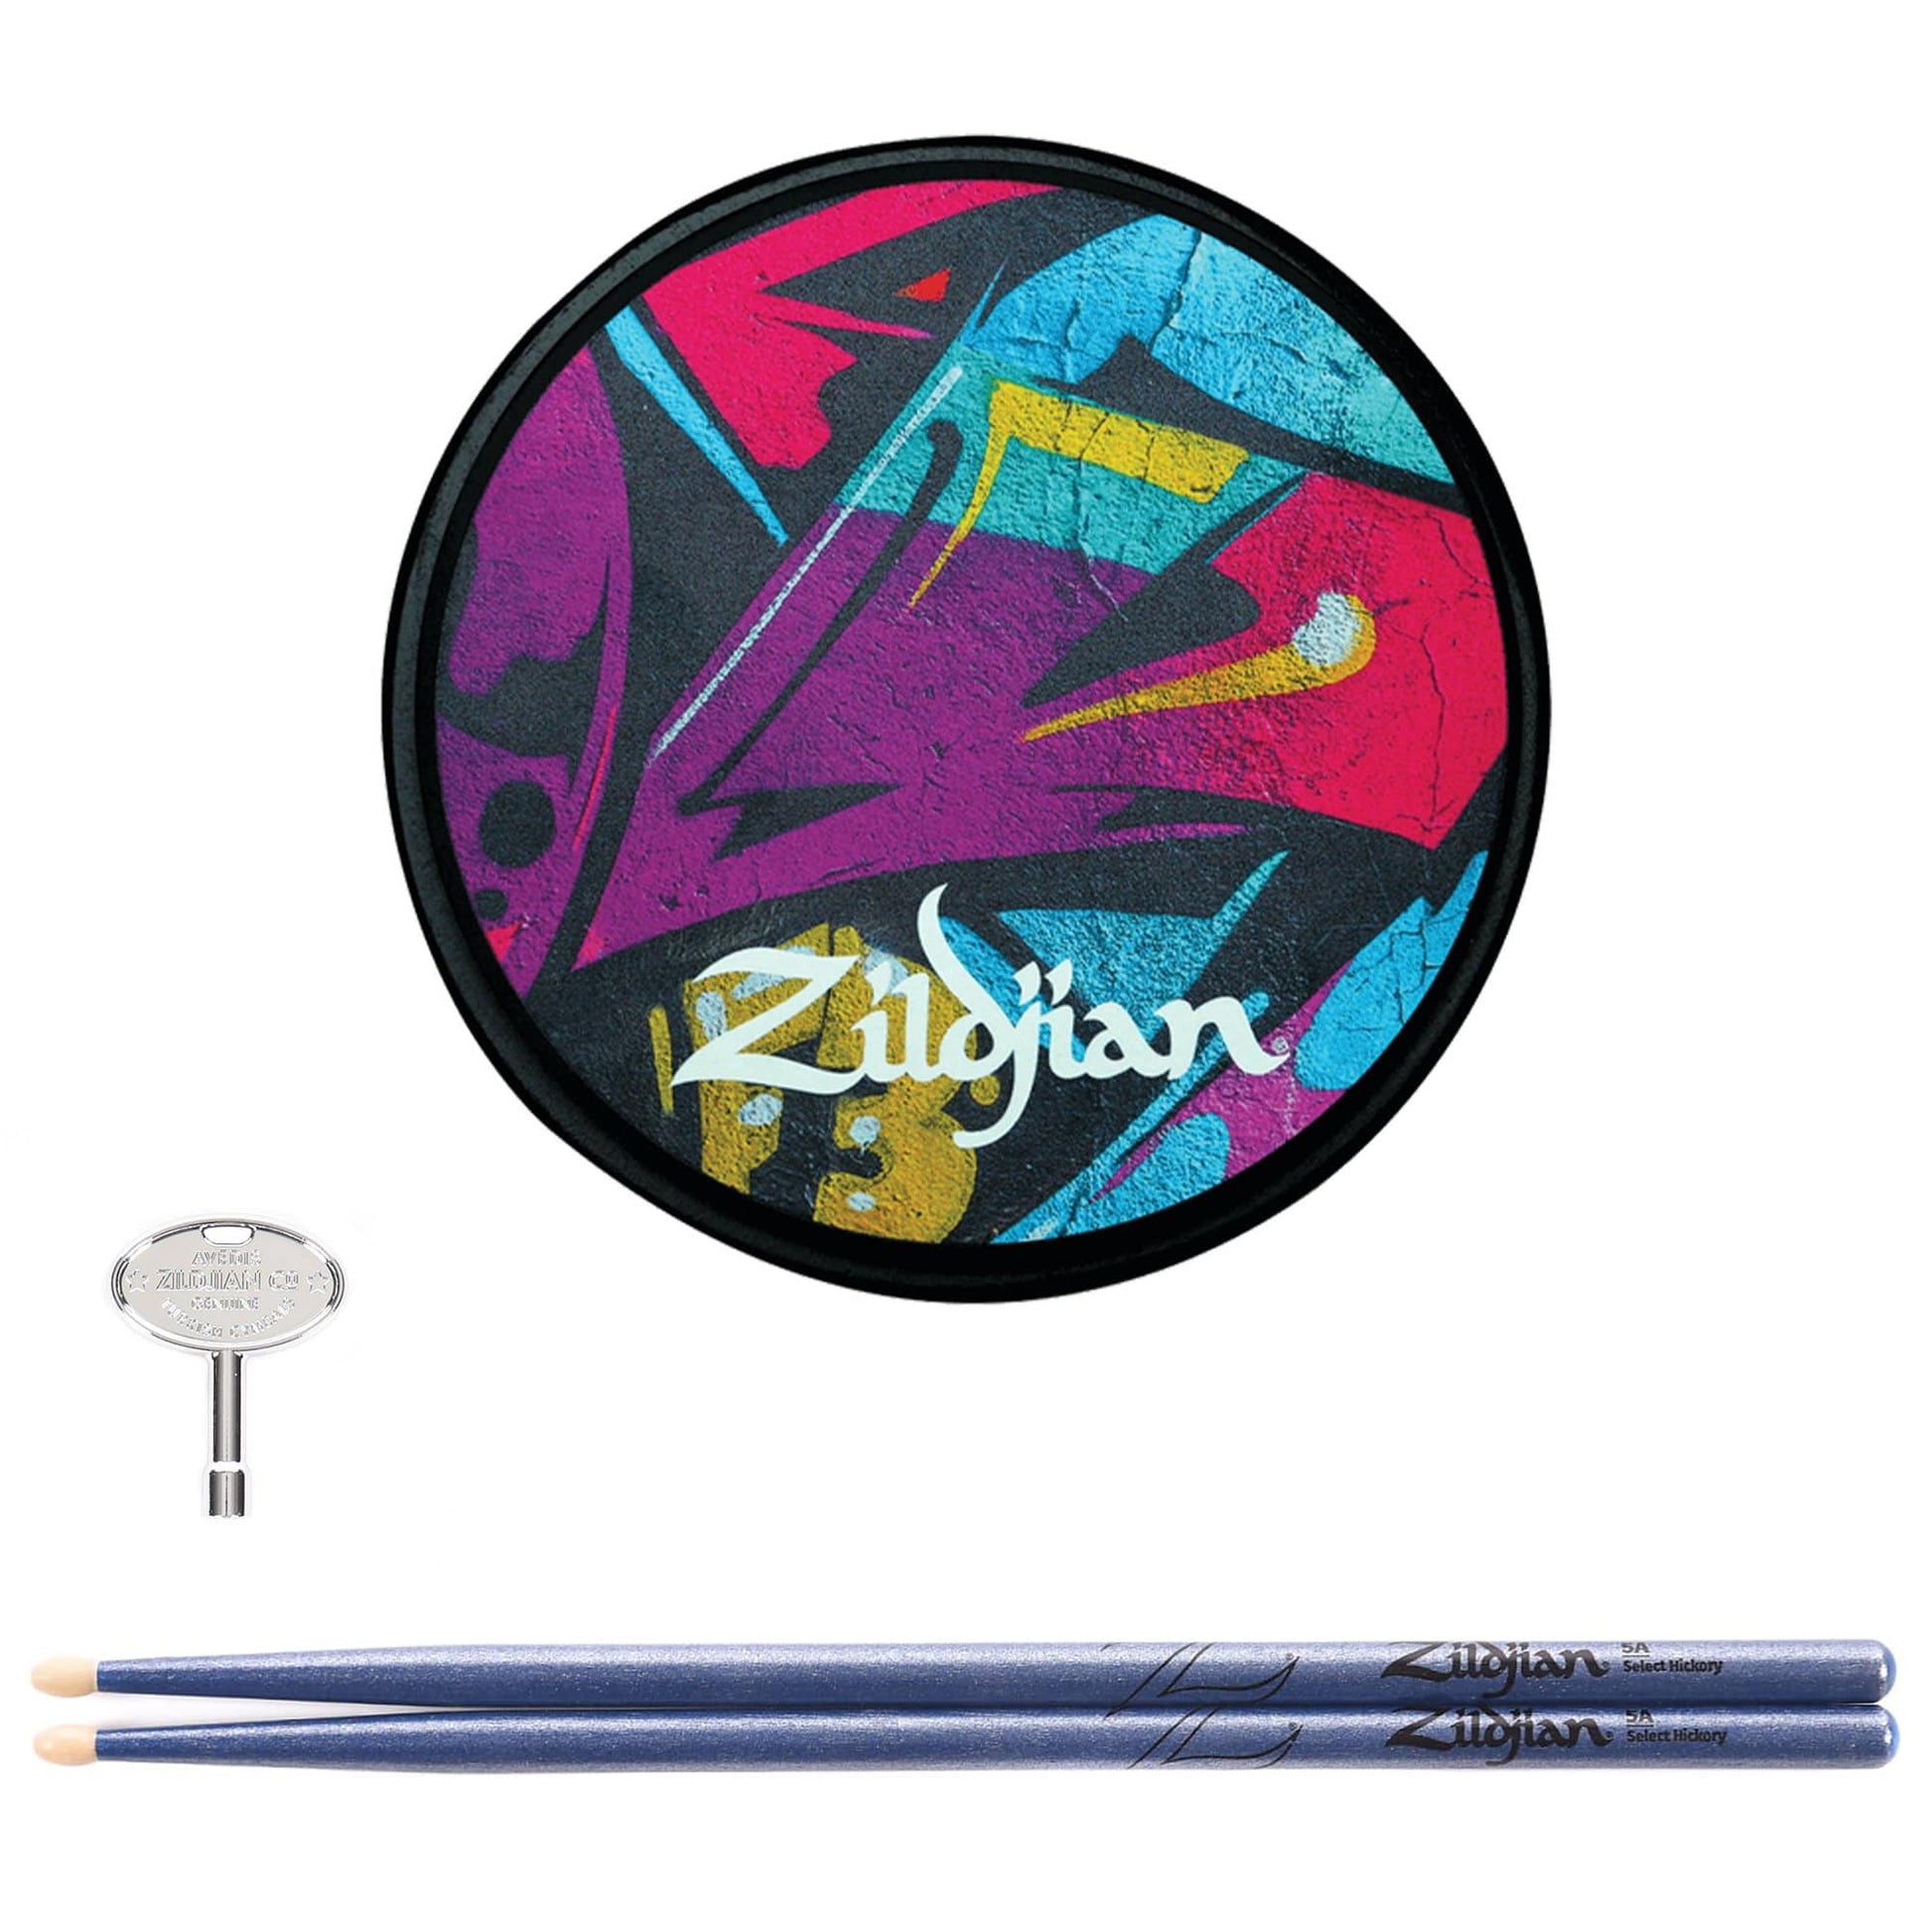 Zildjian 6" Grafitti Practice Pad, 5A Blue Chroma Drum Sticks, and Trademark Drum Key Bundle Drums and Percussion / Practice Pads